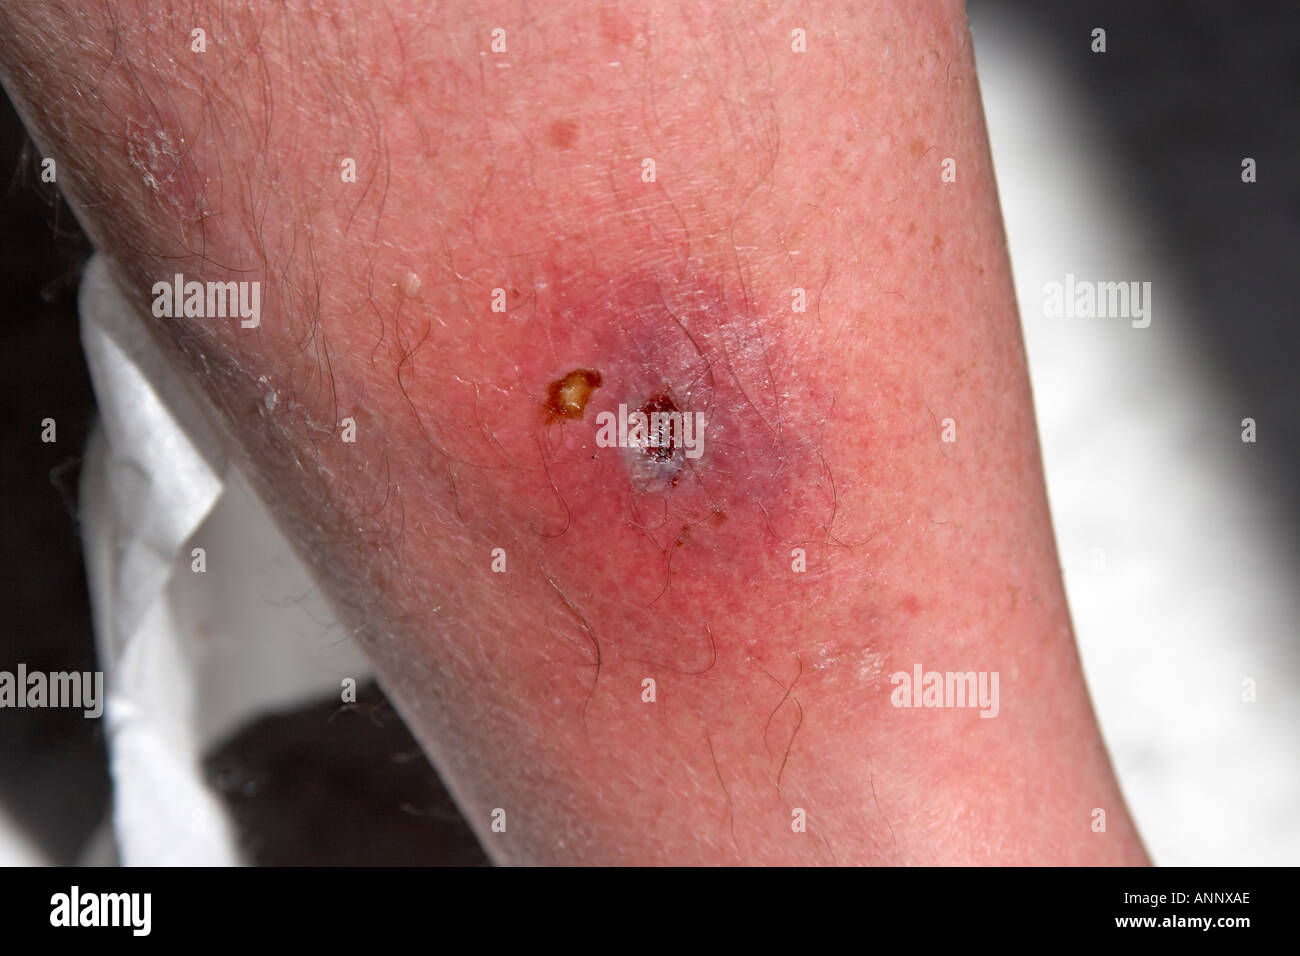 Septic leg wound and scab on shin of middle aged man Stock Photo - Alamy